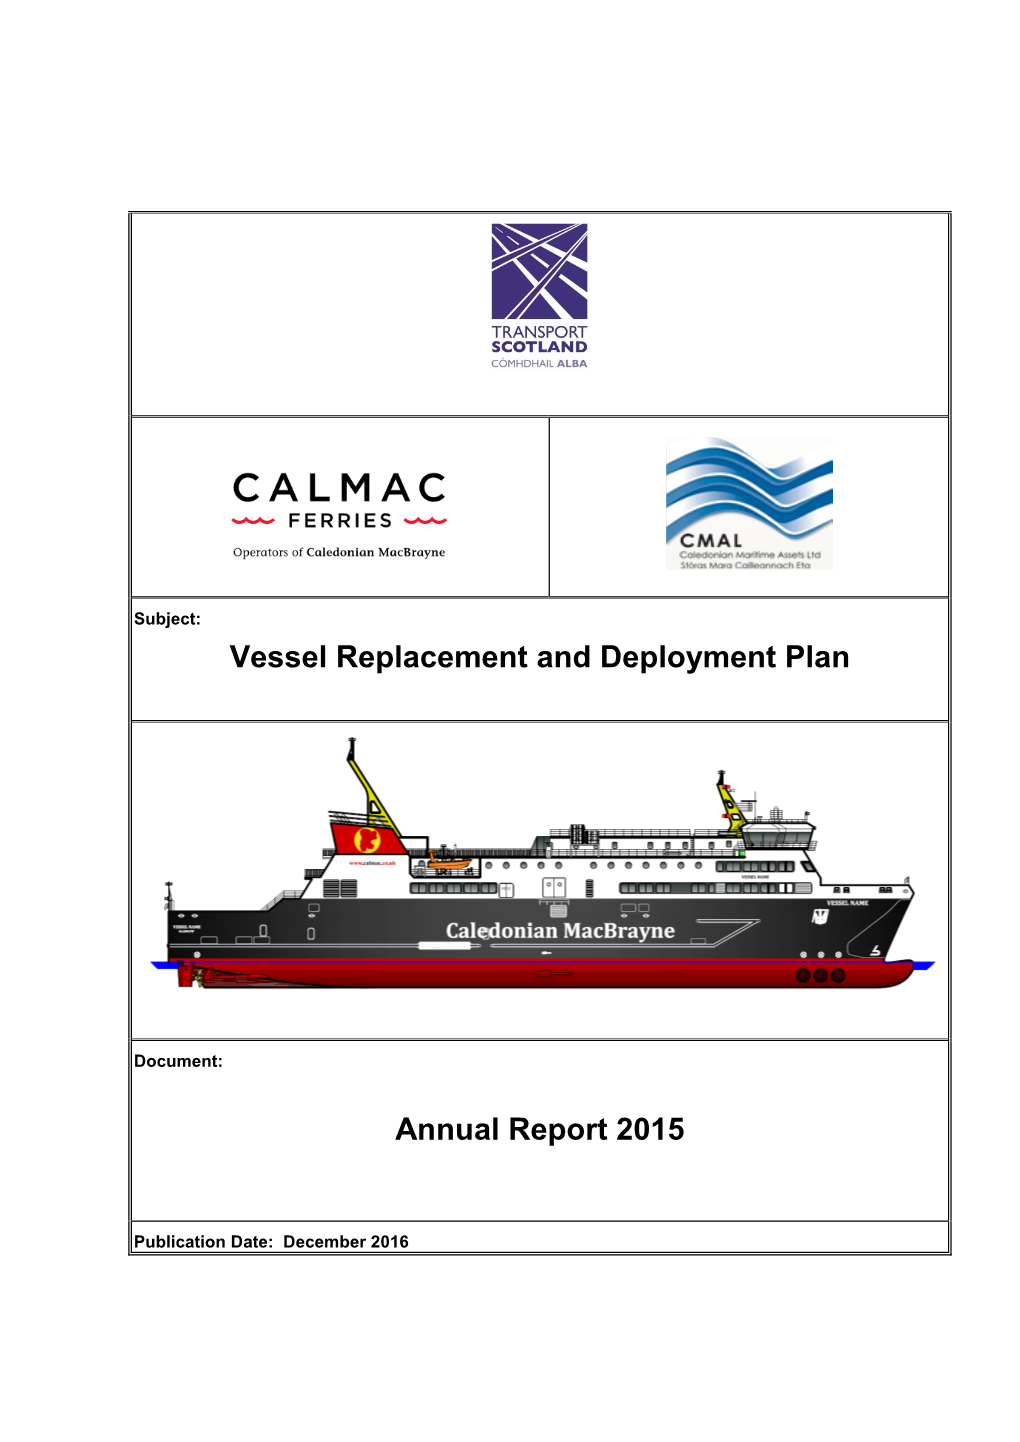 Vessel Replacement and Deployment Plan Annual Report 2015